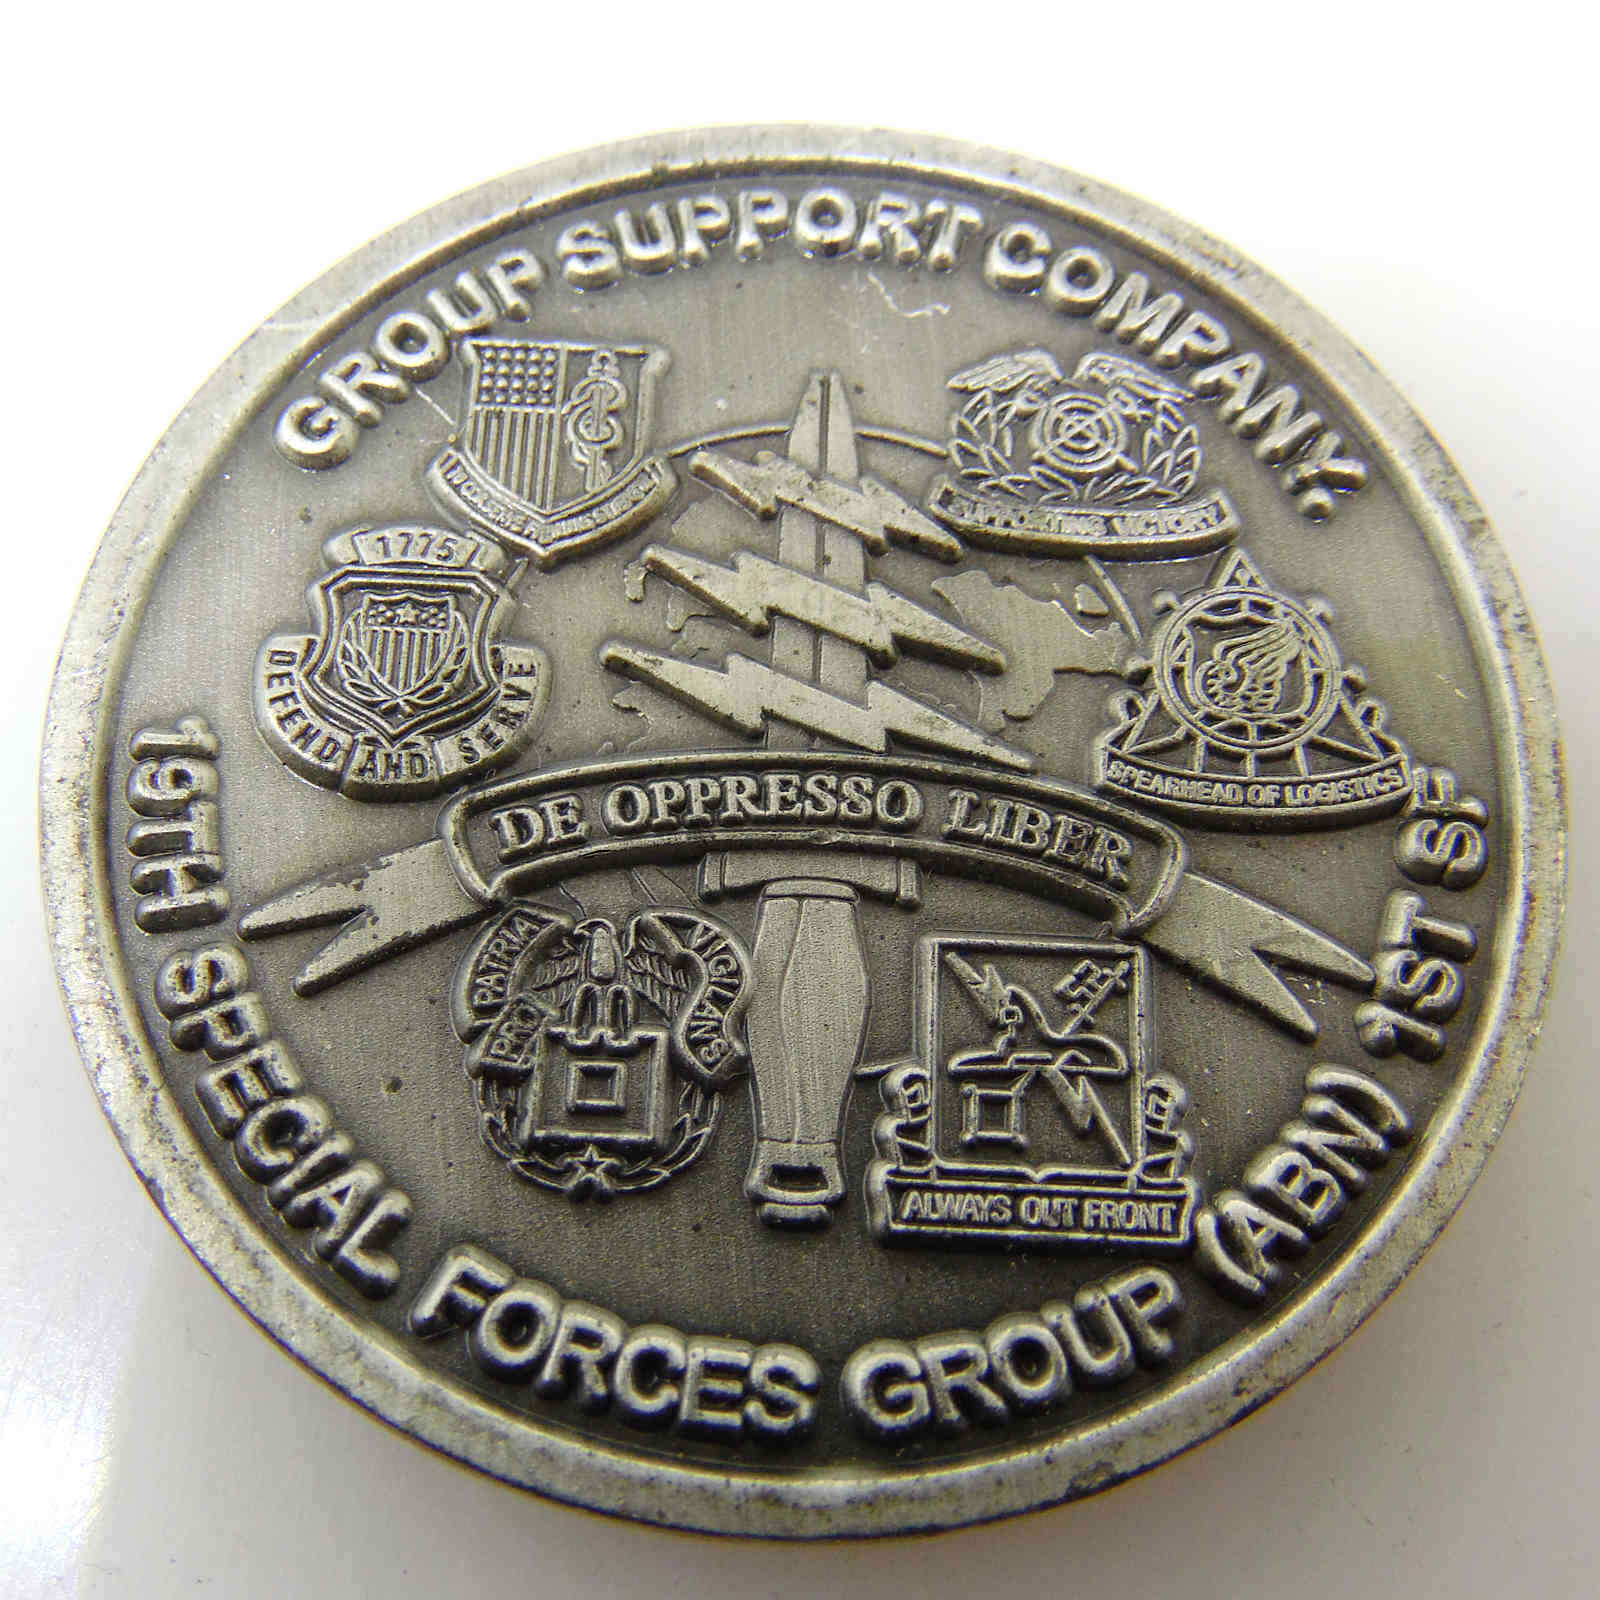 19TH SPECIAL FORCES GROUP 1ST SF GROUP SUPPORT COMPANY CHALLENGE COIN